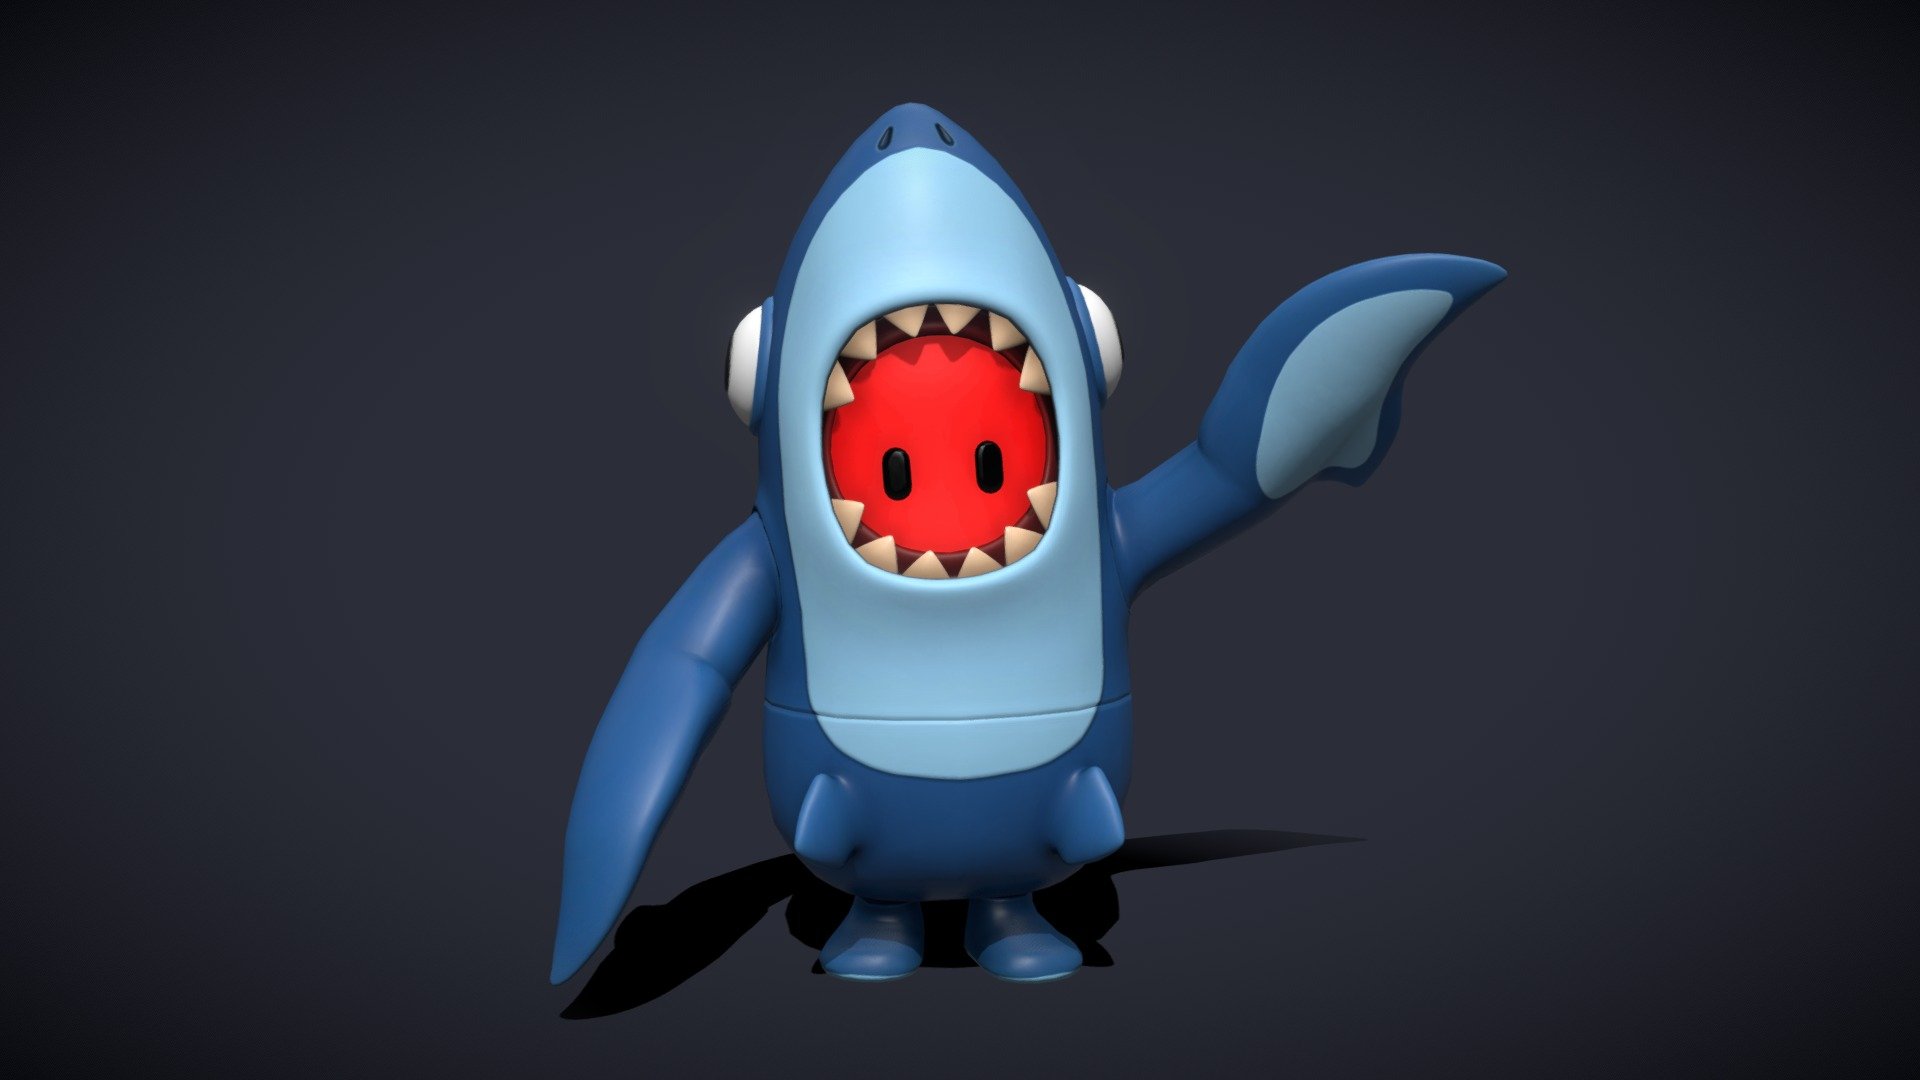 Been having fun playing Fall Guys Ultimate Knockout, so I decided to design and create my own original costume. https://www.artstation.com/artwork/zOKqK4 - Fall Guys Shark Costume - 3D model by chrishirkill 3d model